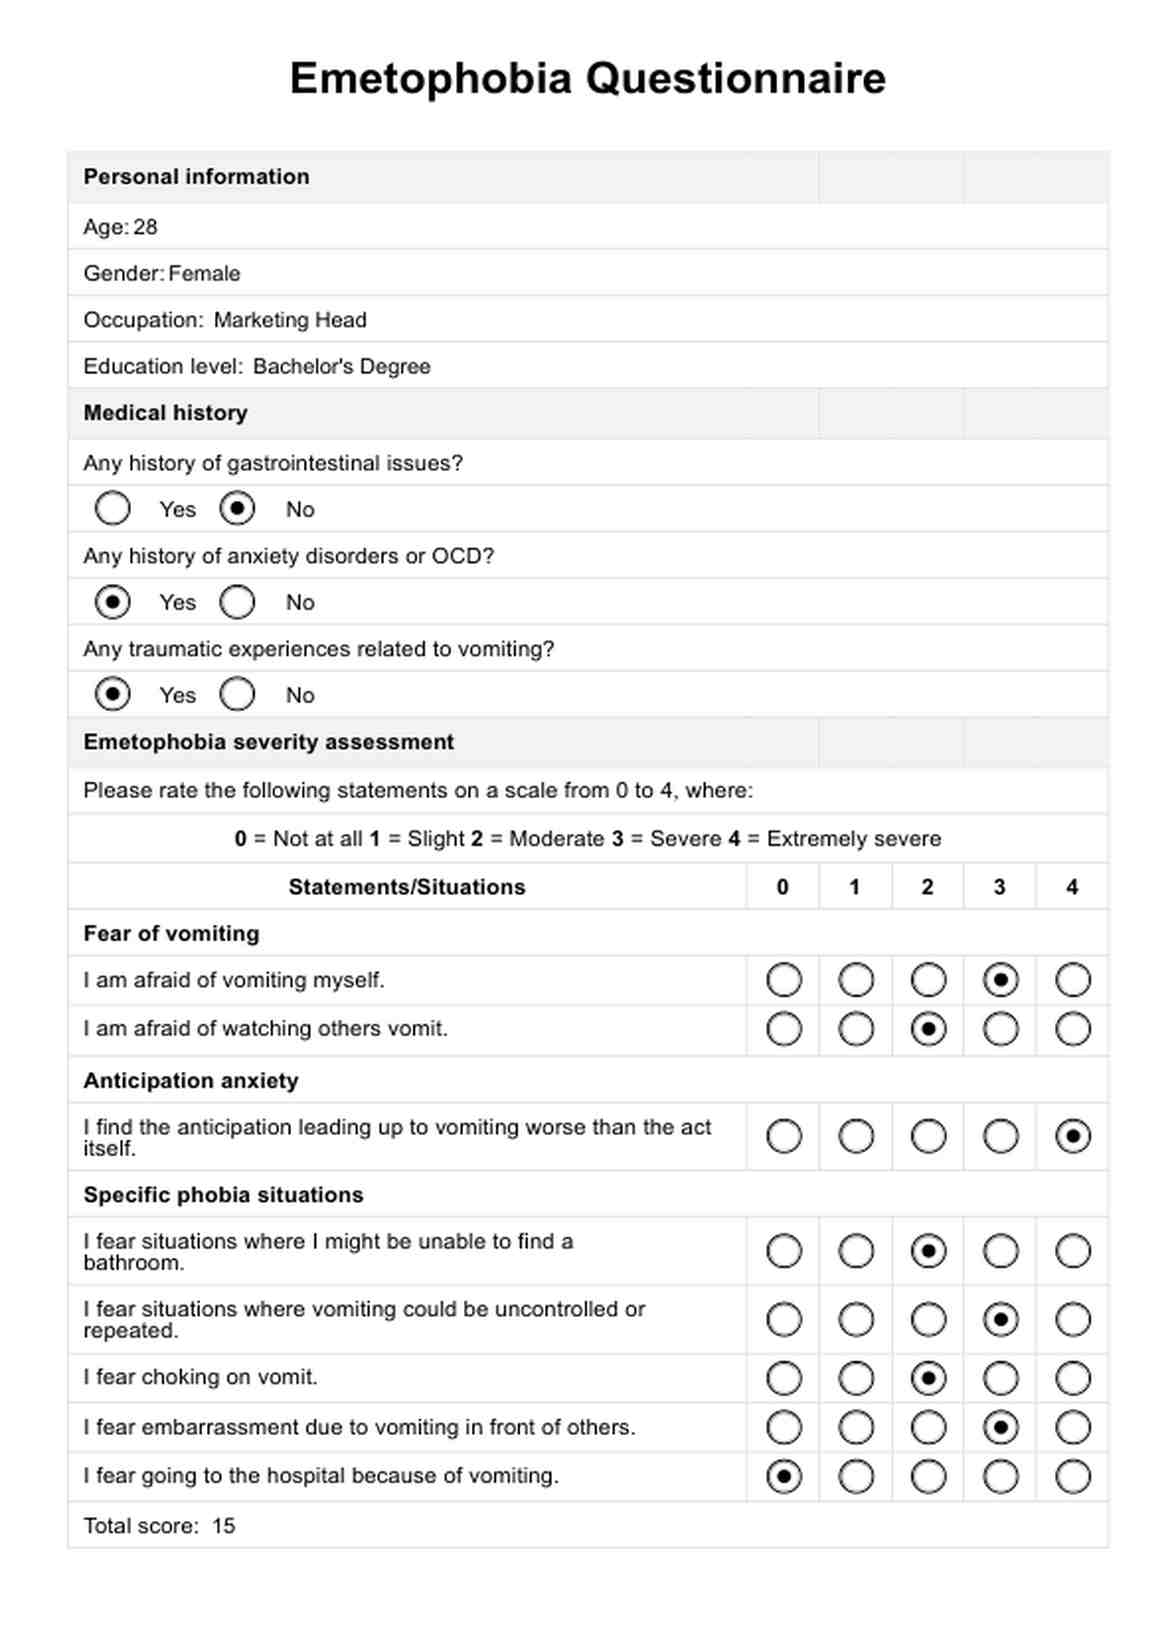 Emetophobia Questionnaire Template PDF Example